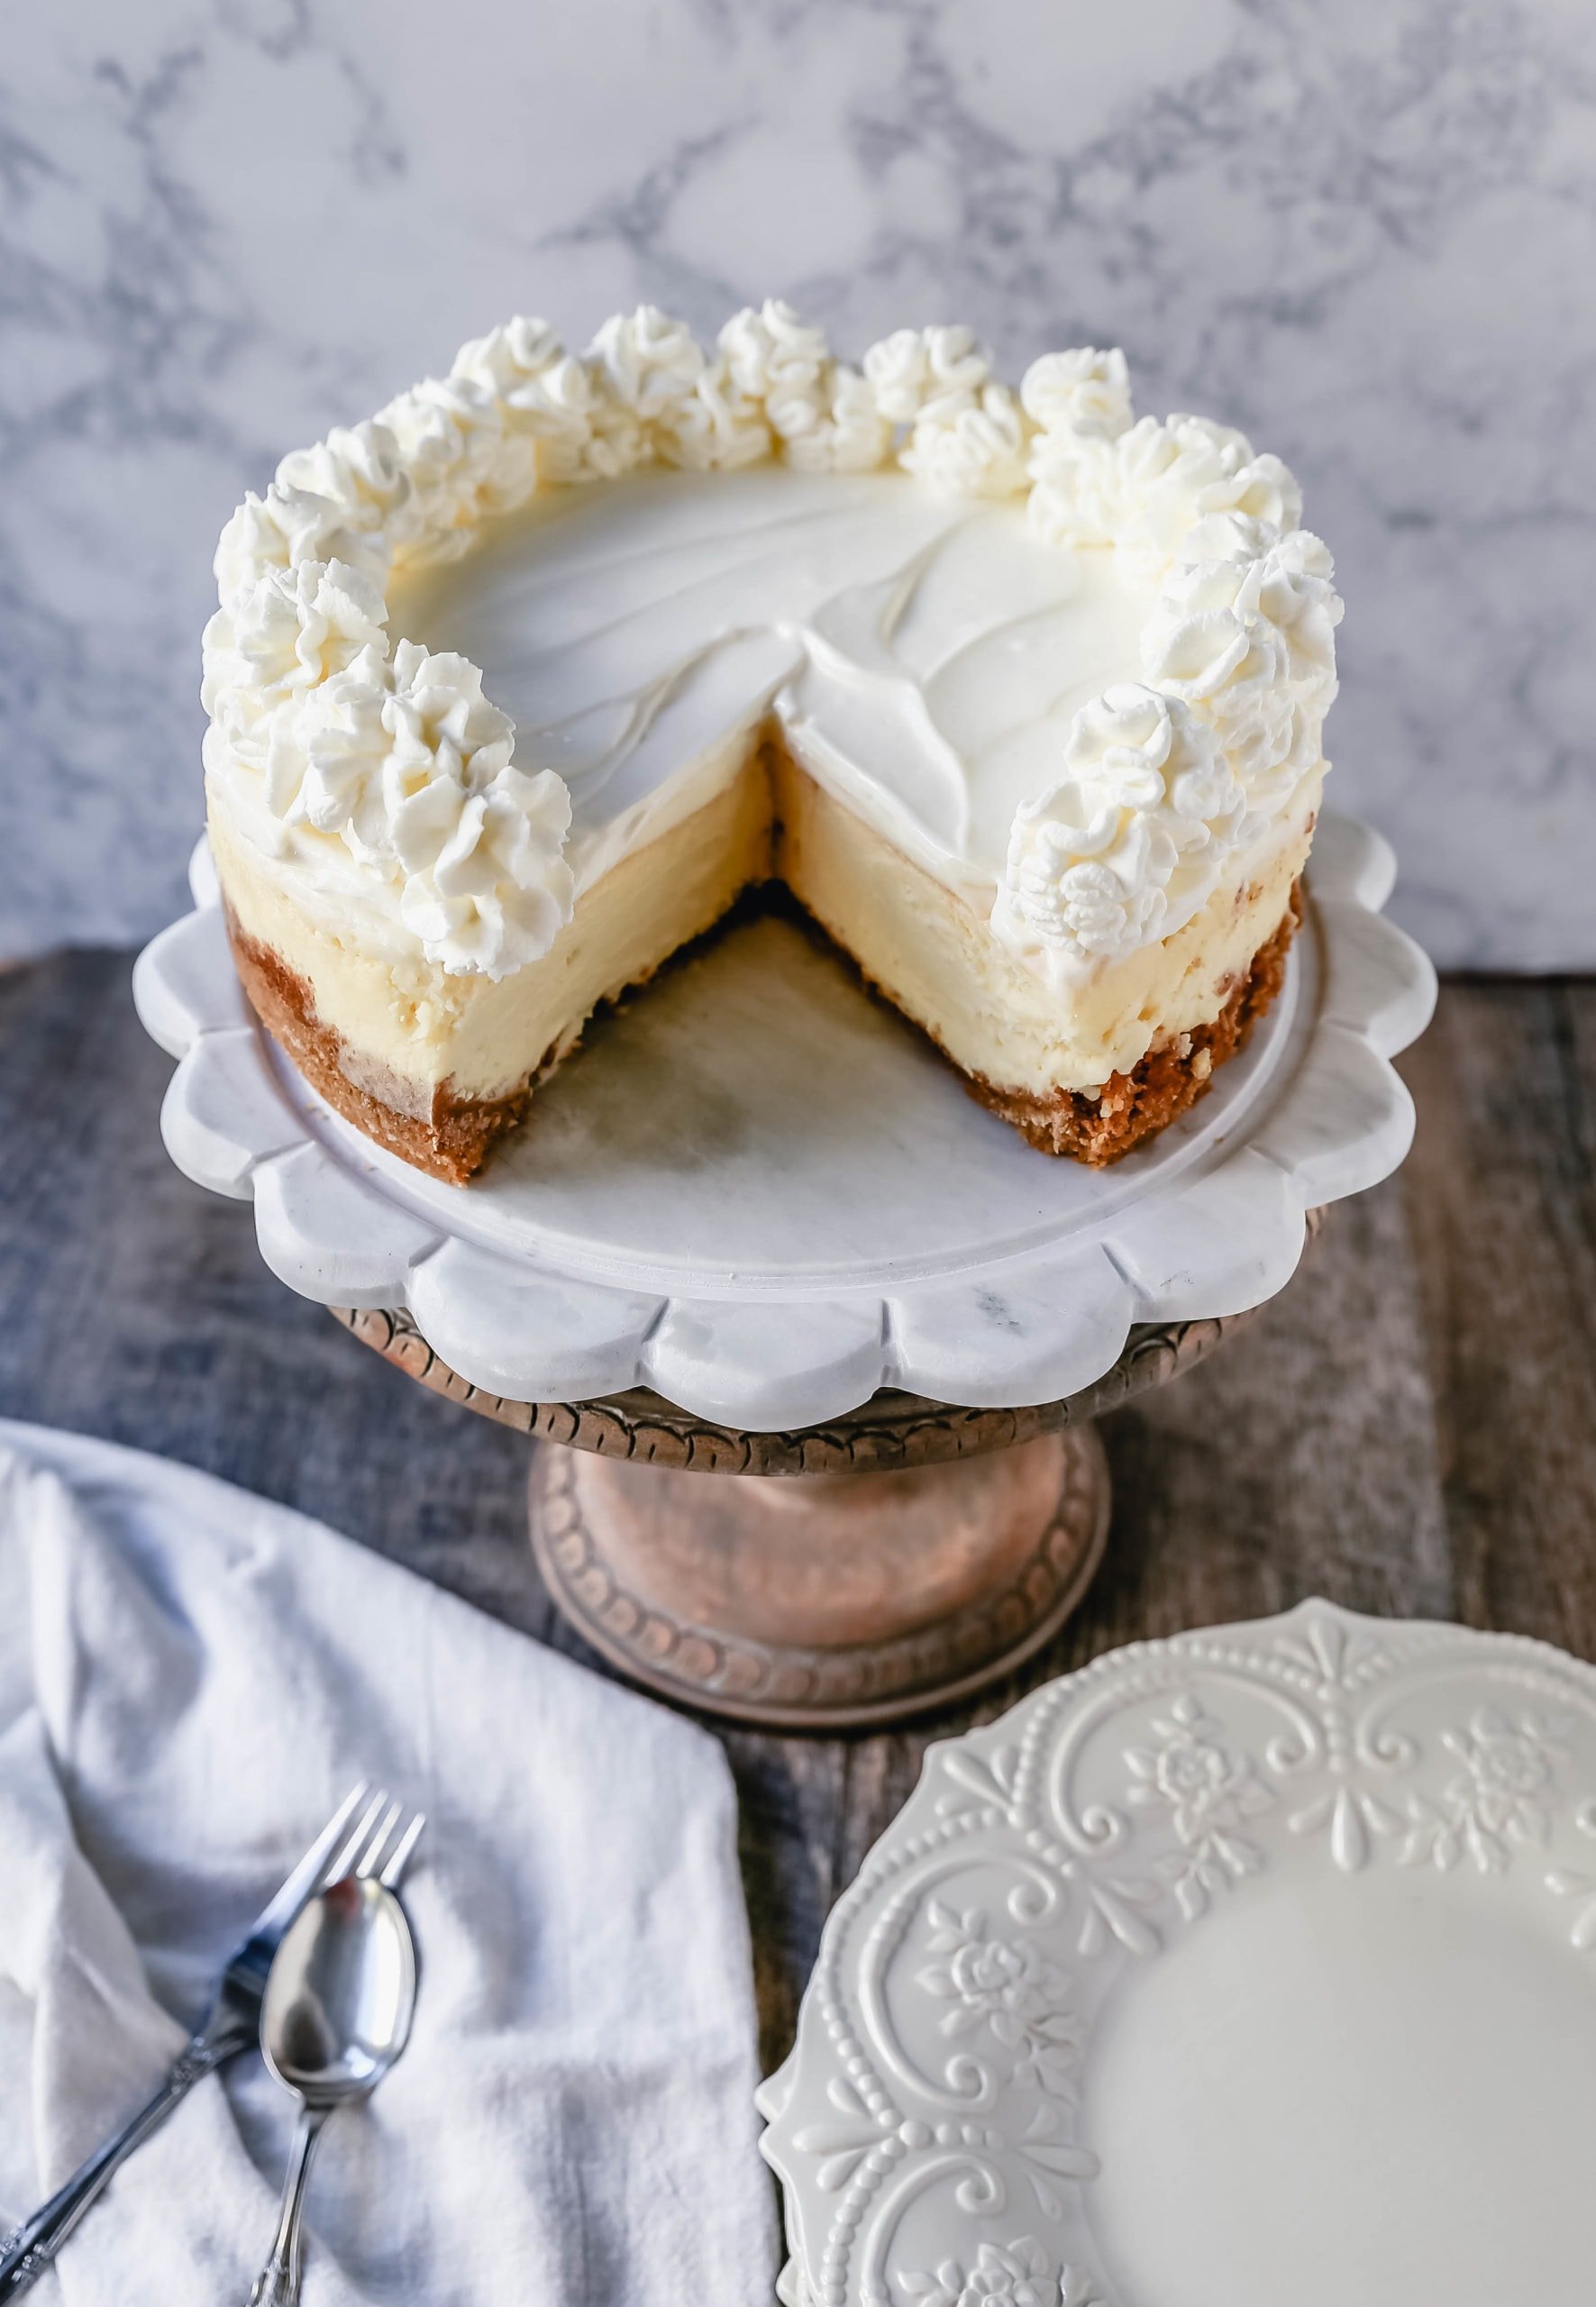 The Best Cheesecake Recipe How to make the creamiest, dreamiest, richest vanilla cheesecake with a buttery graham cracker crust. All of the tips and tricks for making the perfect cheesecake! www.modernhoney.com #cheesecake #vanillacheesecake #cheesecakerecipe #dessert